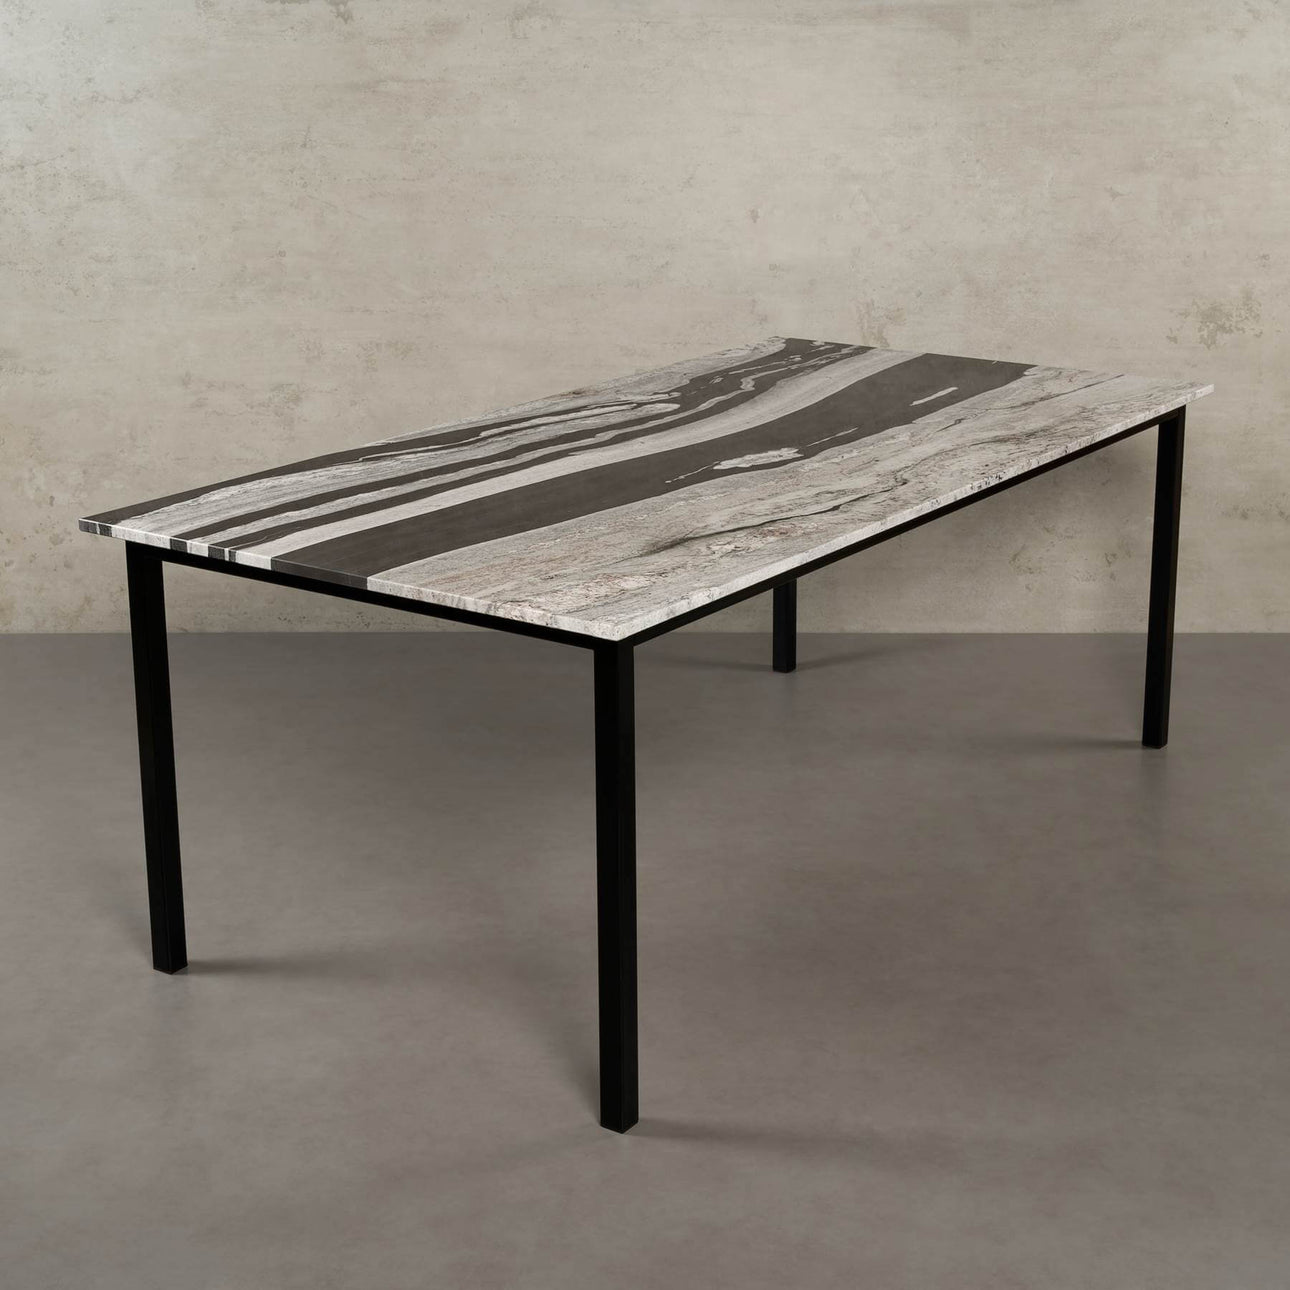 Sapporo marble dining table